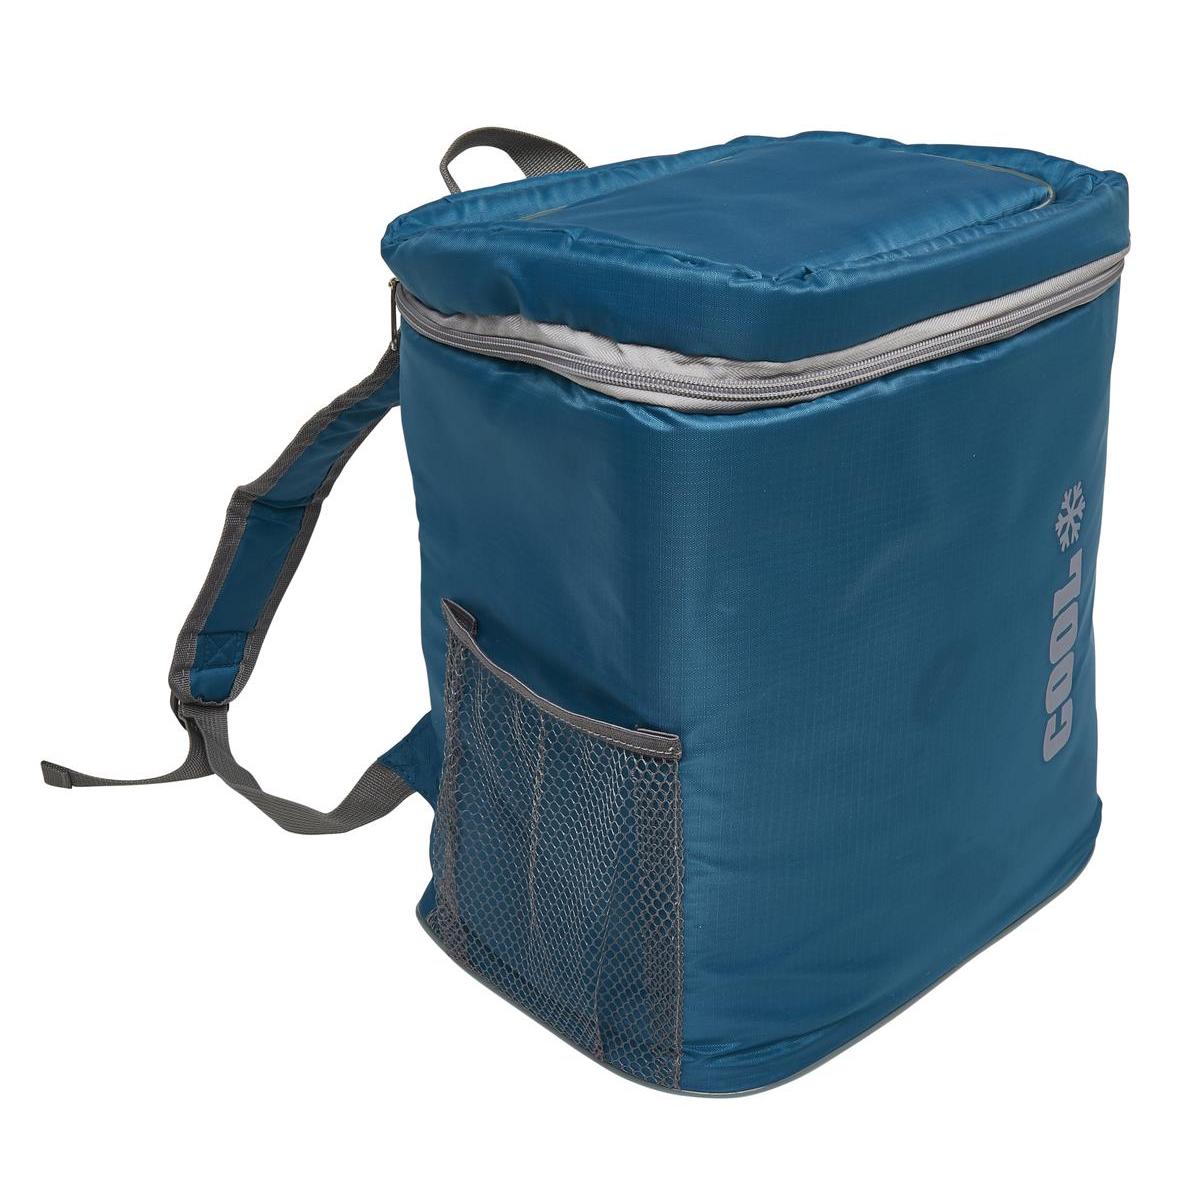 WANABEE Sac a dos isotherme Ice Walk 10L - Gris - La Poste